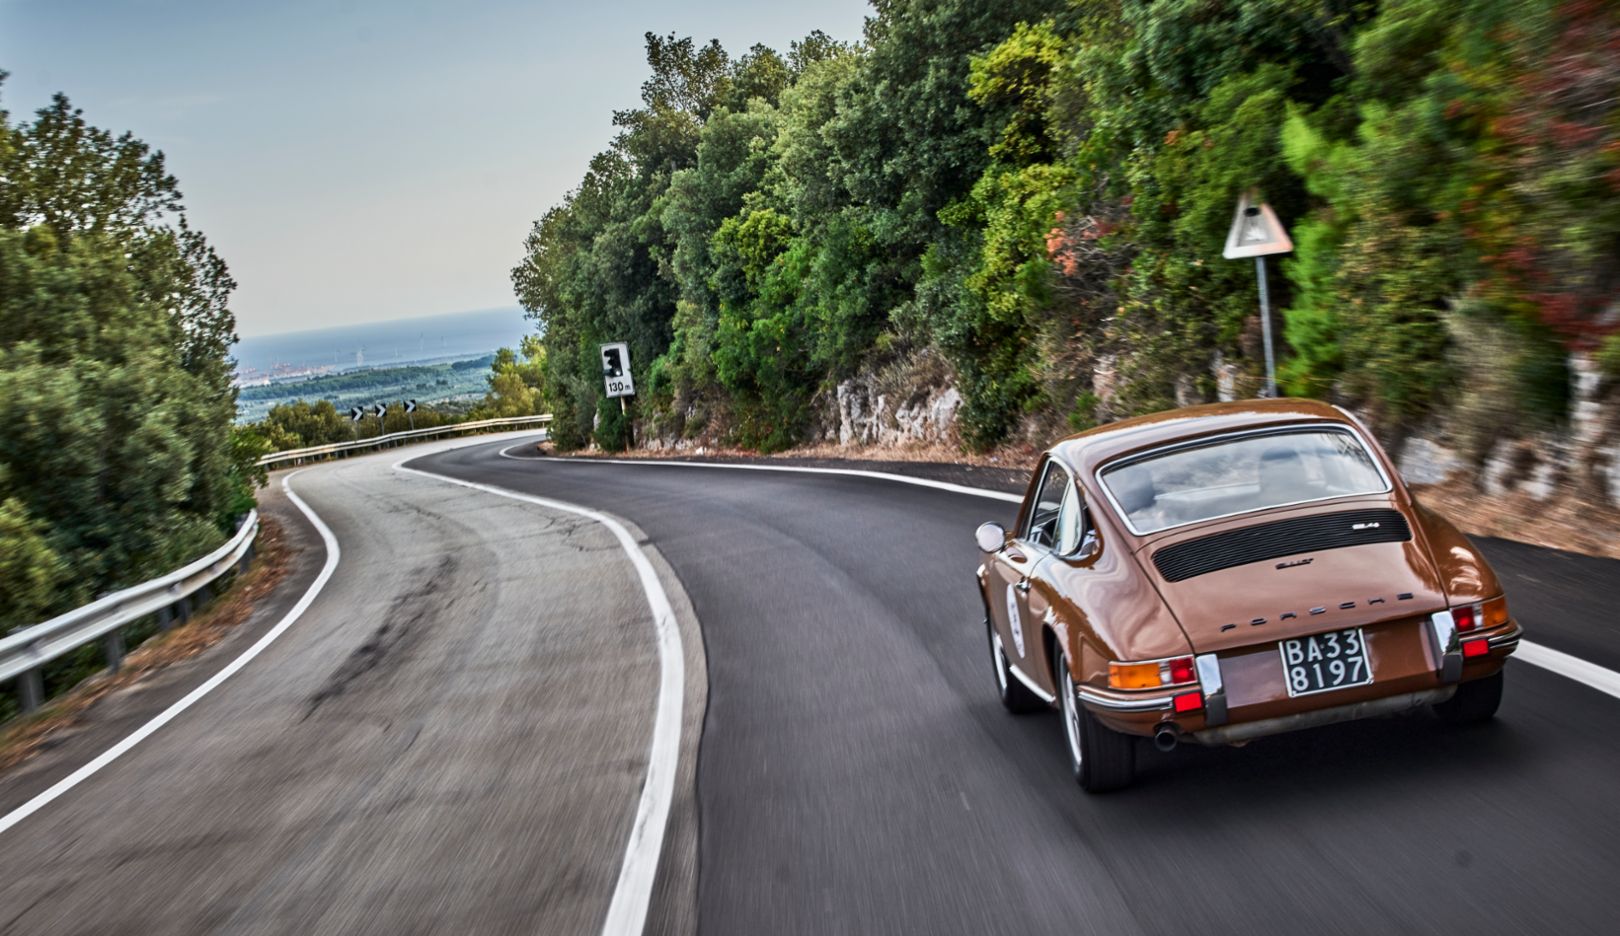 Elegance in Sepia Brown: The 911 TE, built in 1972, on the route toward the sea.